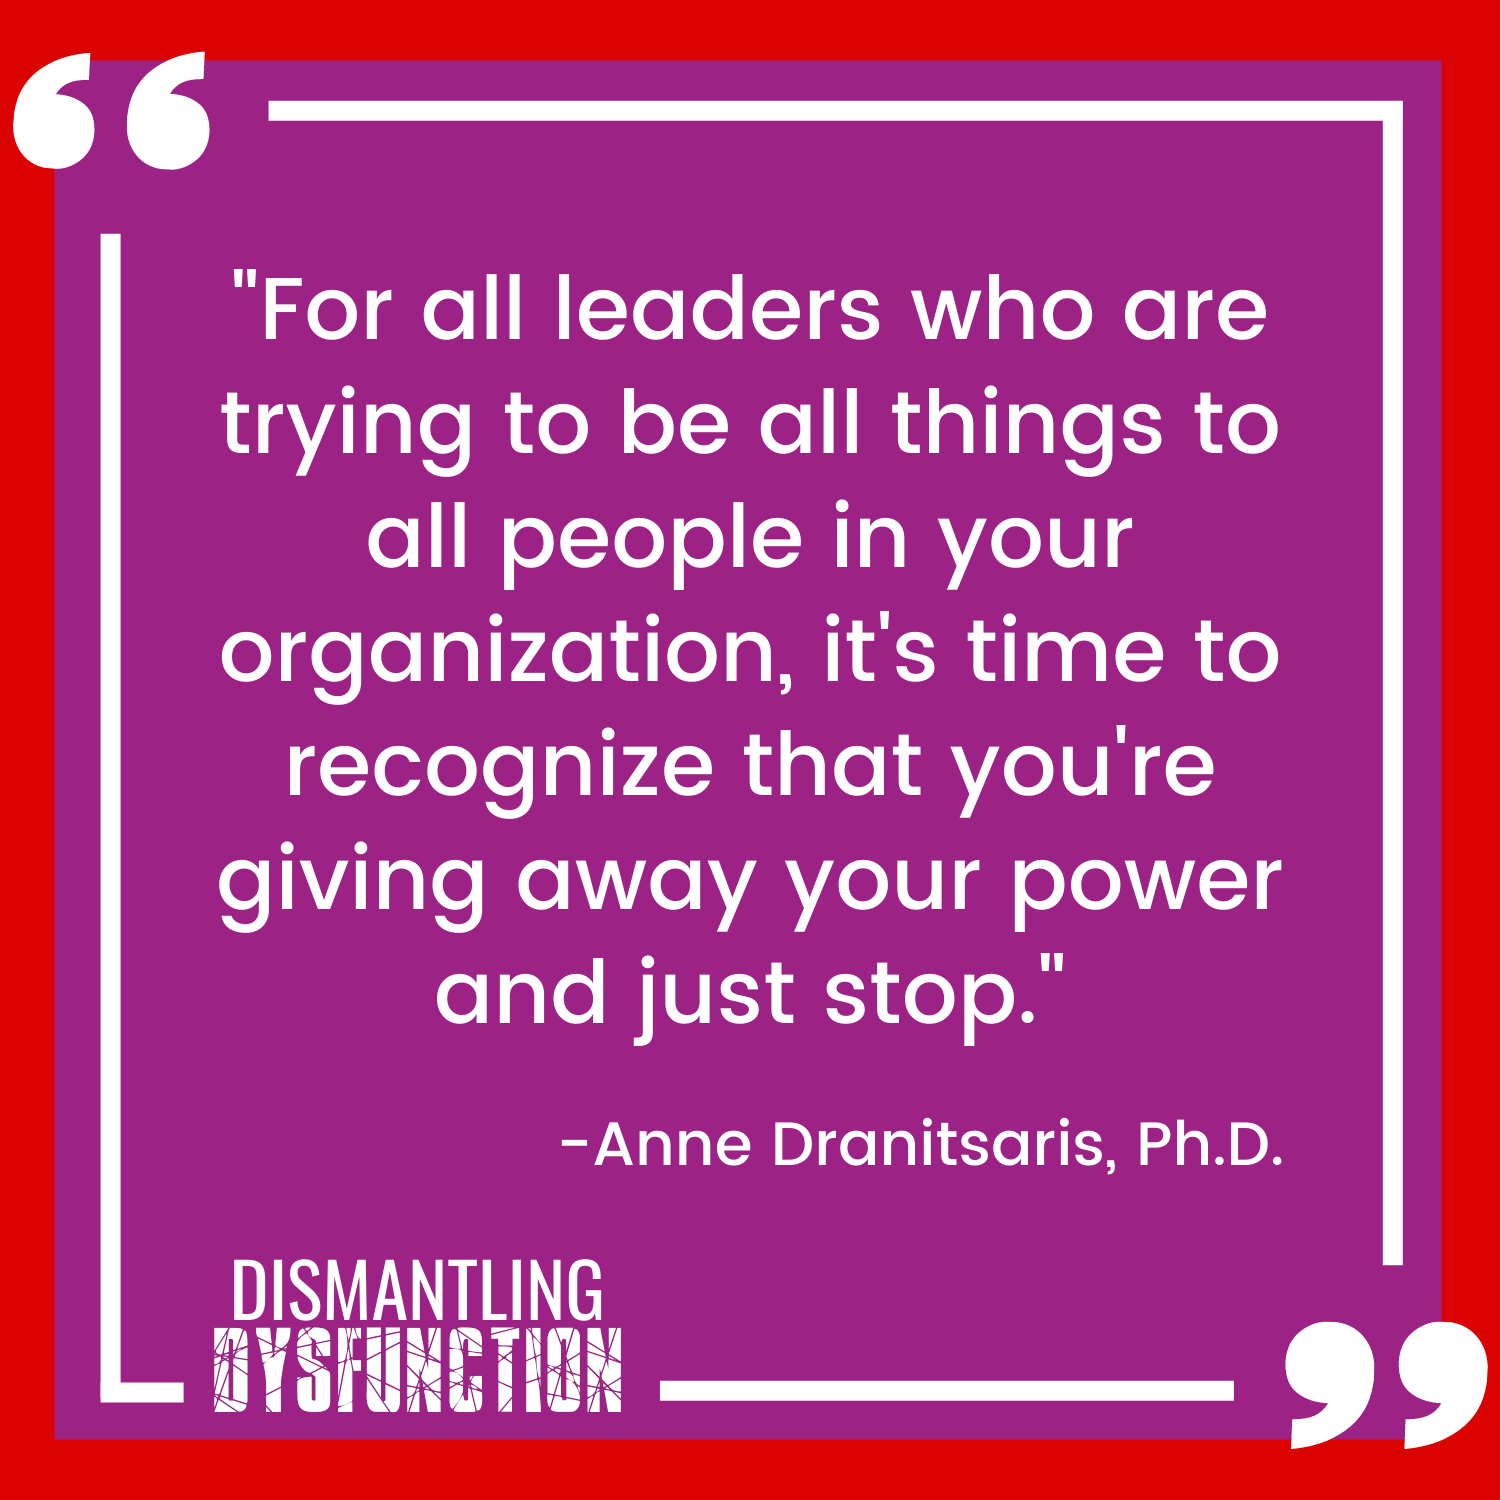 Directive leadership behavior that has no emotional charge to it is not autocratic - Anne Dranitsaris quote